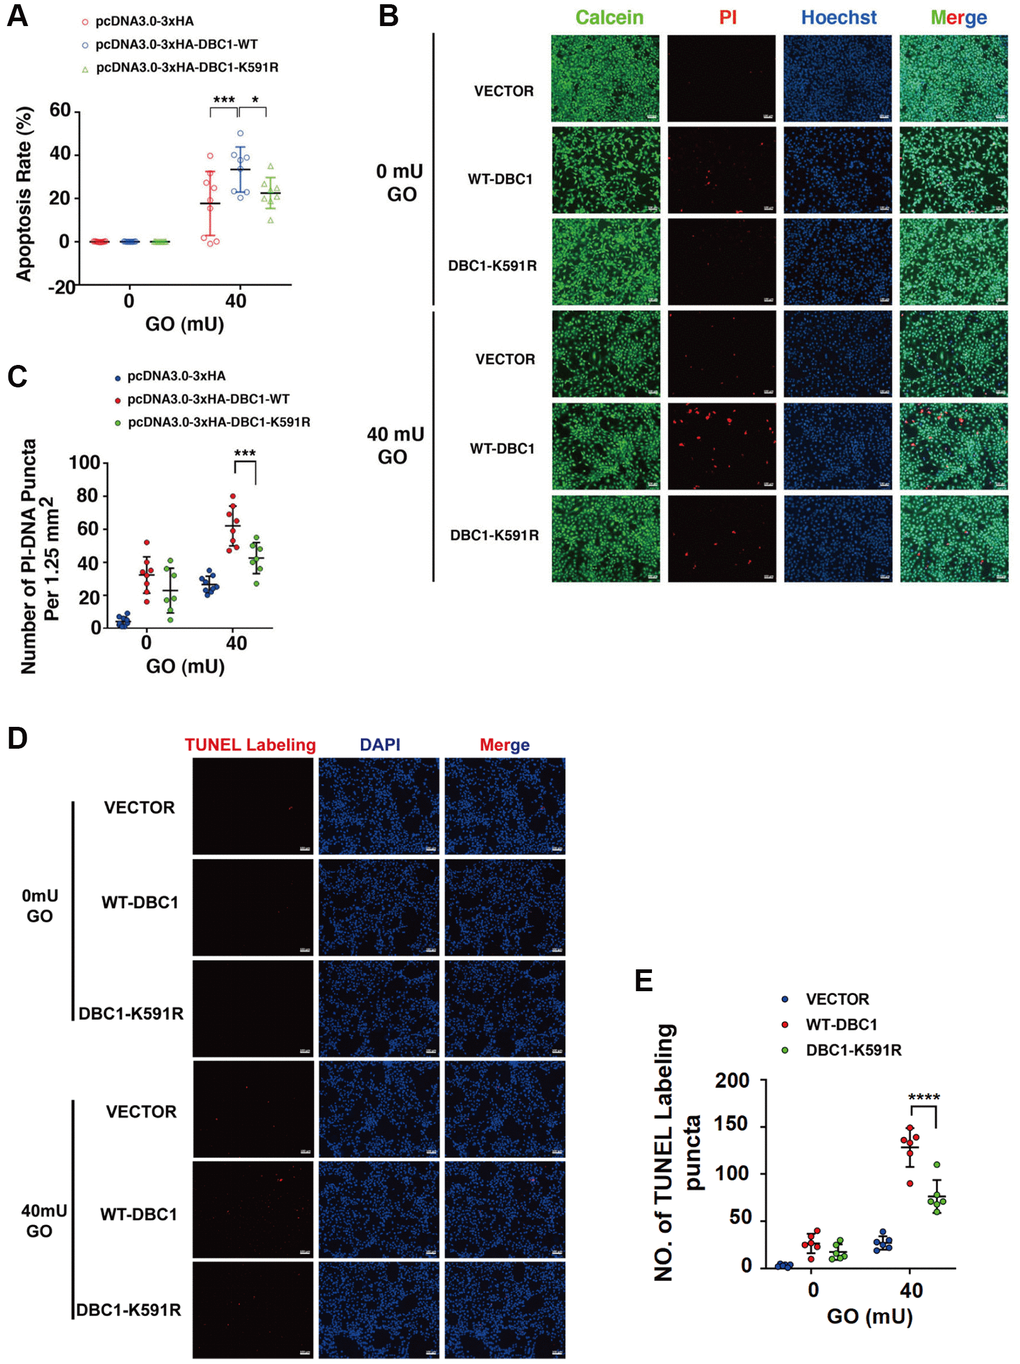 SUMOylation of DBC1 at K591 enhances oxidative stress-apoptosis. (A) DBC1 KO cells were transiently transfected with HA-vector, HA-DBC1-WT, or HA-DBC1-K591R as indicated. Cell viability assay was conducted to analyze cell apoptosis rate changes in the three types of cells under 40 mU GO treatment for 5 hours. (B) Calcein/PI Cell Viability/Cytotoxicity assay analyzed cell apoptosis of the three types of cells under the same treatment as in A. Scale bar, 100 μm. (C) Quantification of the PI-DNA puncta in panel B. *p ***p D) TUNEL labeling assay under the same treatment as indicated. Scale bar, 100 μm. (E) Quantification of the TUNEL Labeling puncta in panel (D). ****p 